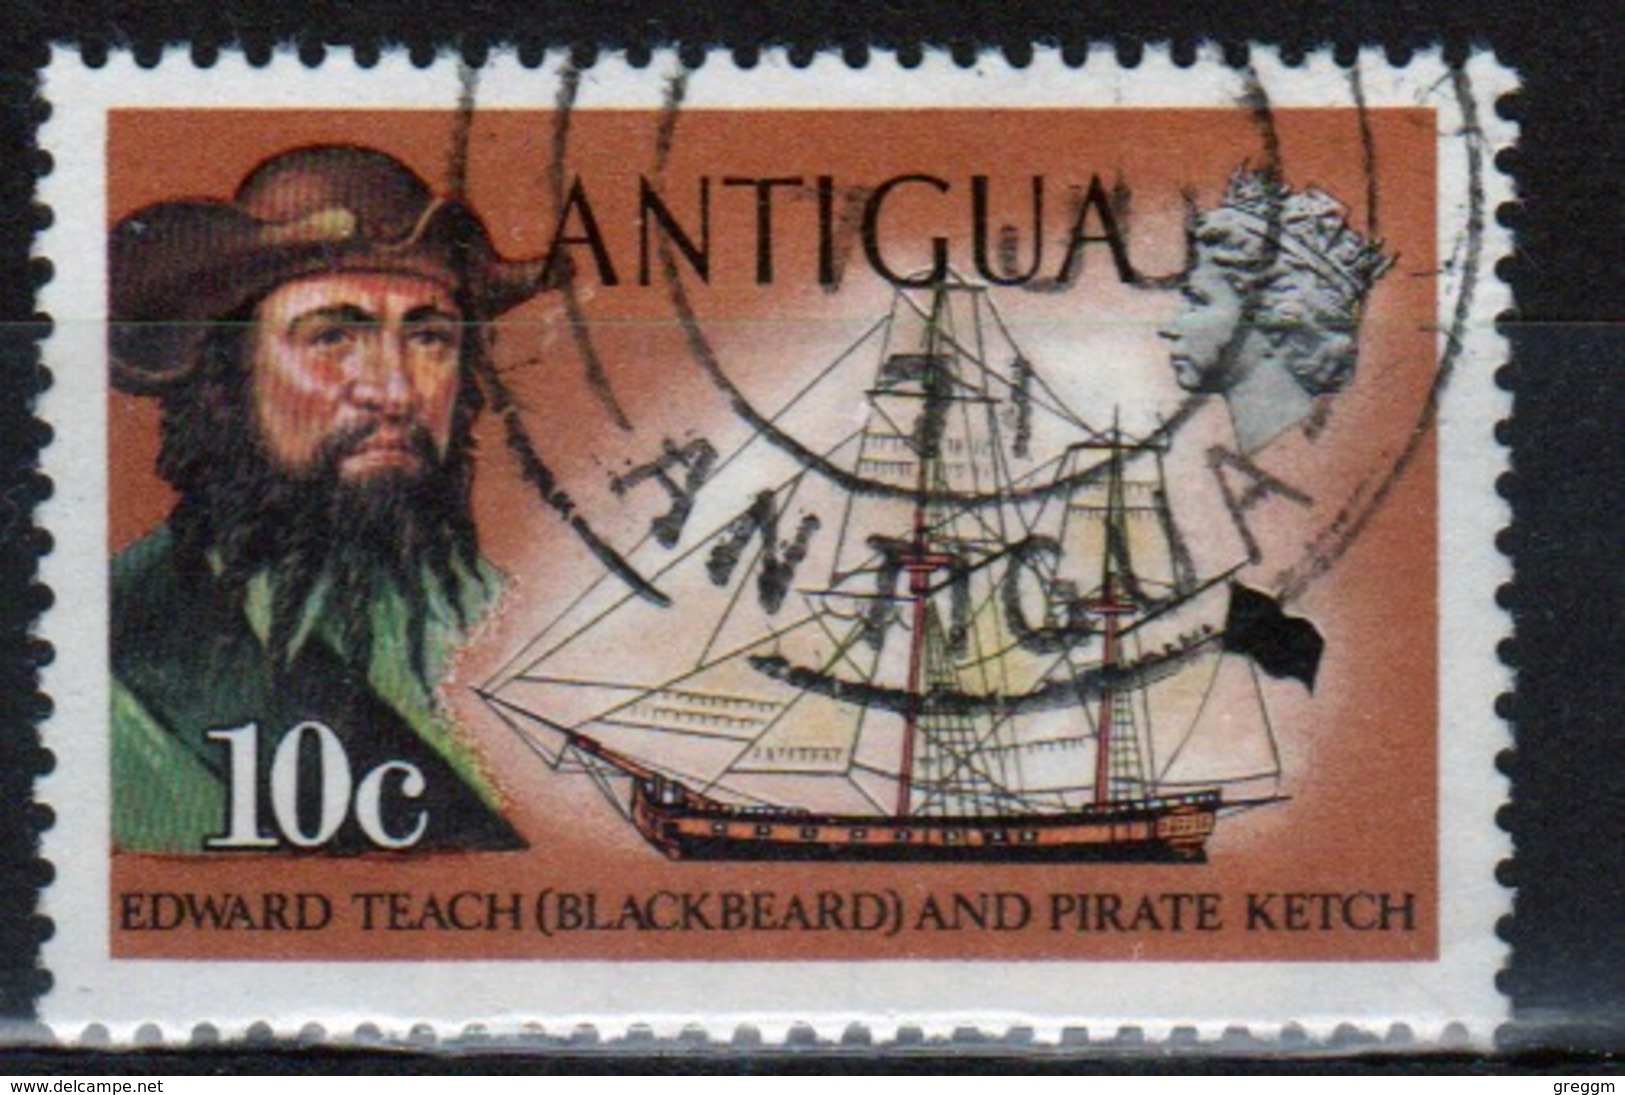 Antigua Single 10 Cent Stamp From The 1970 Definitive Issue Showing Ships. - 1960-1981 Ministerial Government